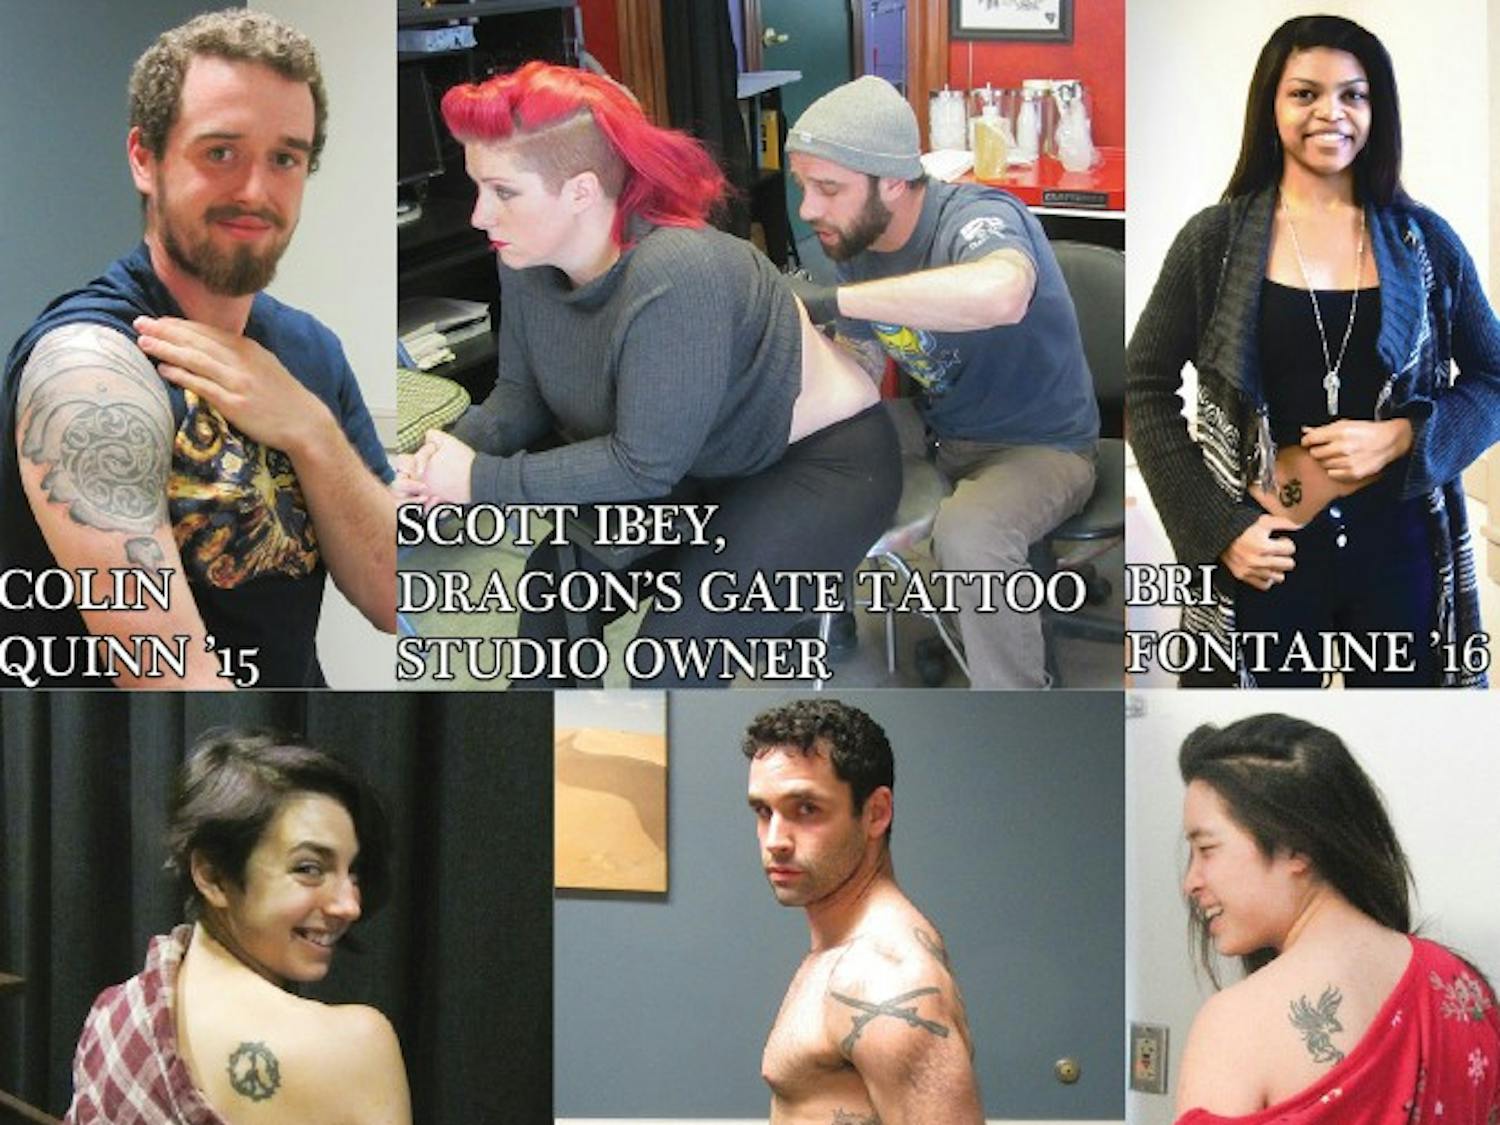 Dartmouth students, Dragon's Gate Tattoo Studio owner Scott Ibey said, usually appear more nervous than his typical clientele.